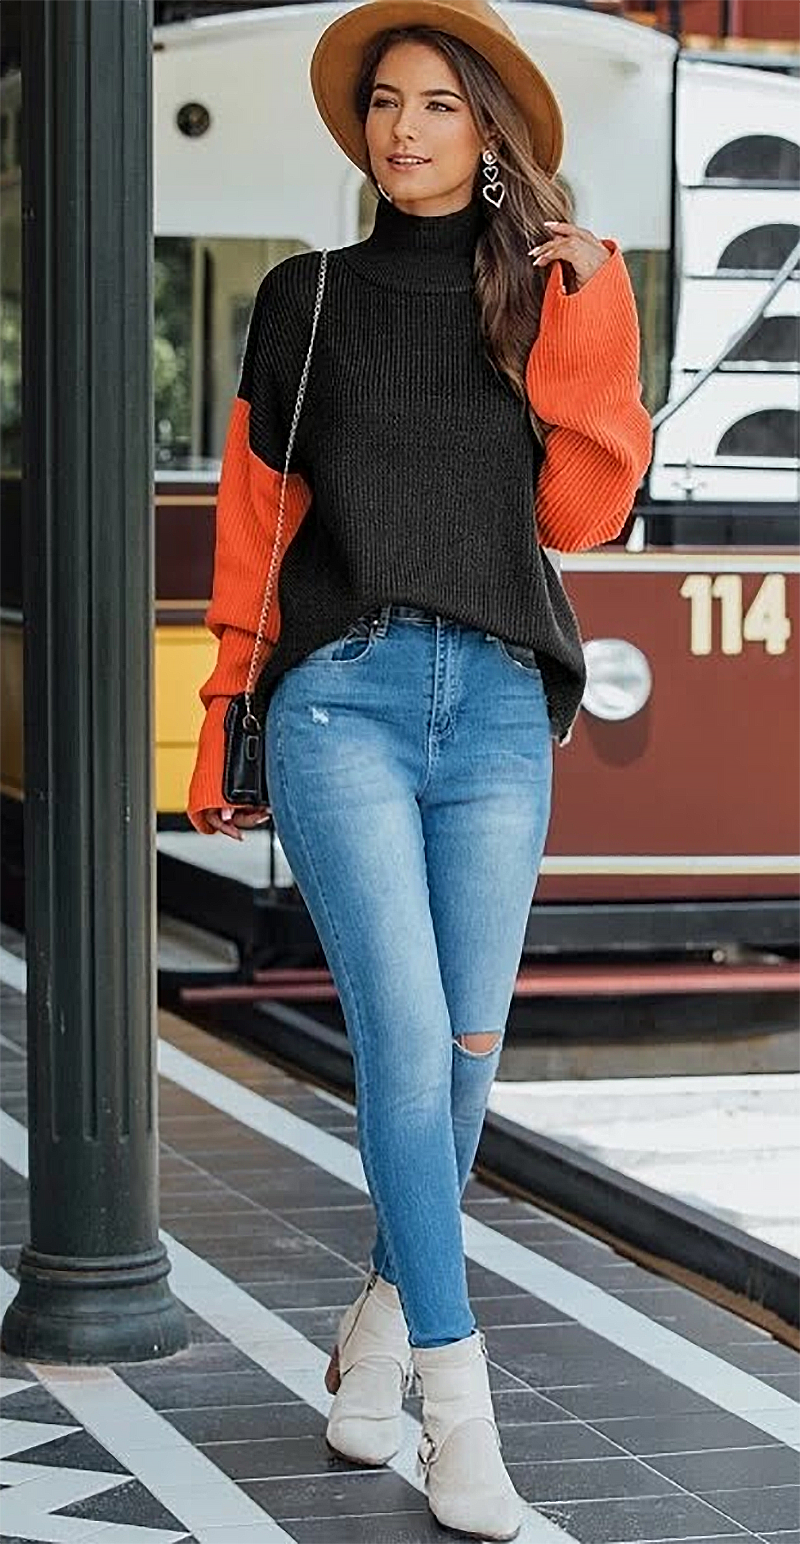 7 New Cute Fall Women Outfit Ideas from SHEIN by Best Ideas 4 yours